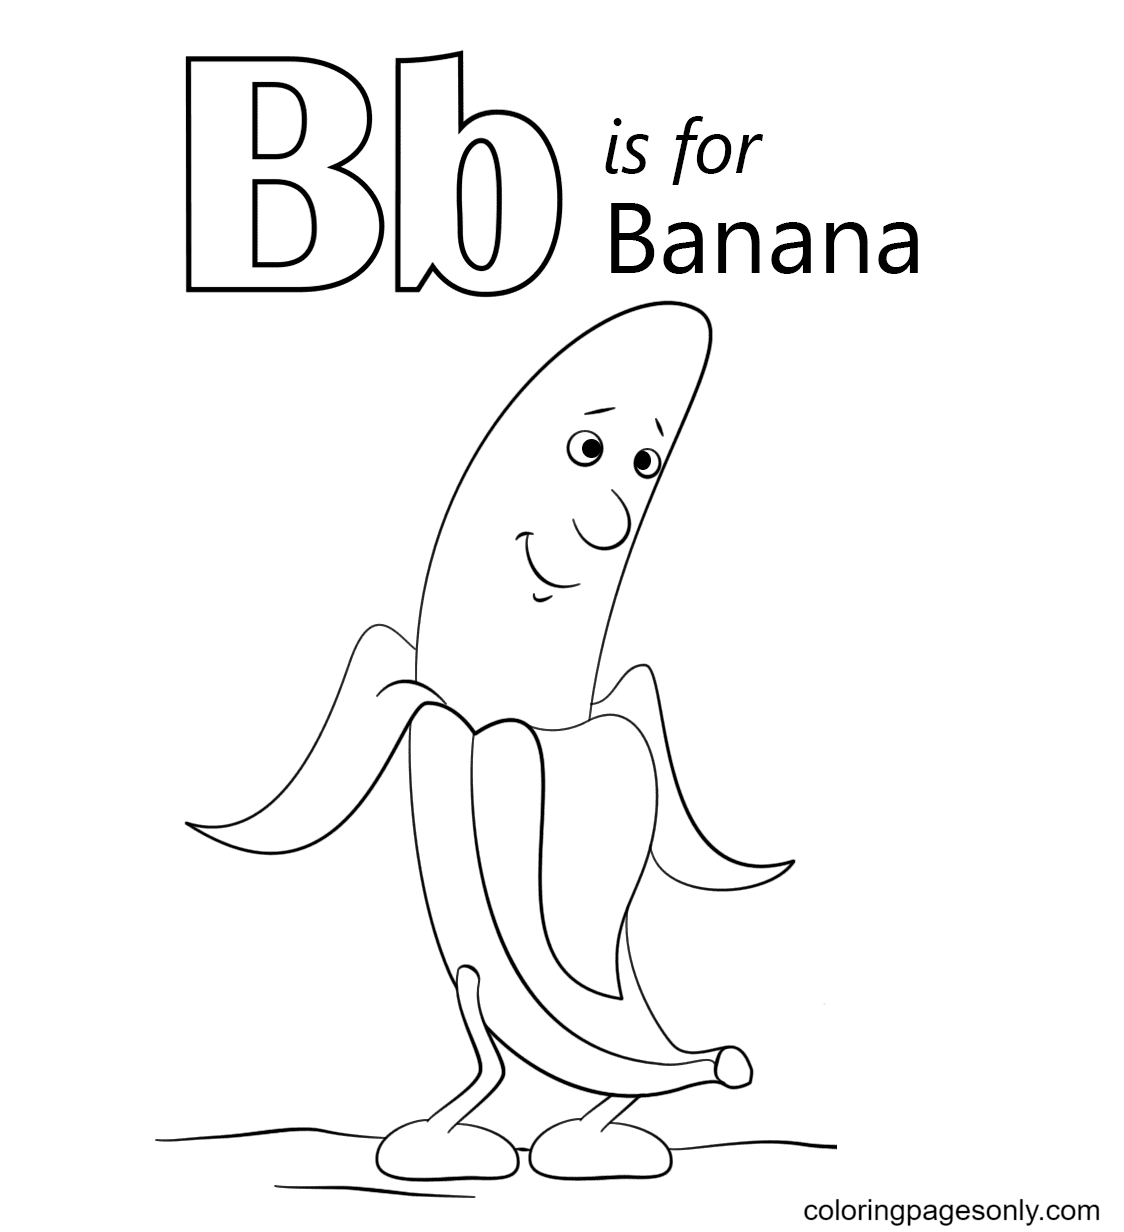 Letter B is for Banana Coloring Page